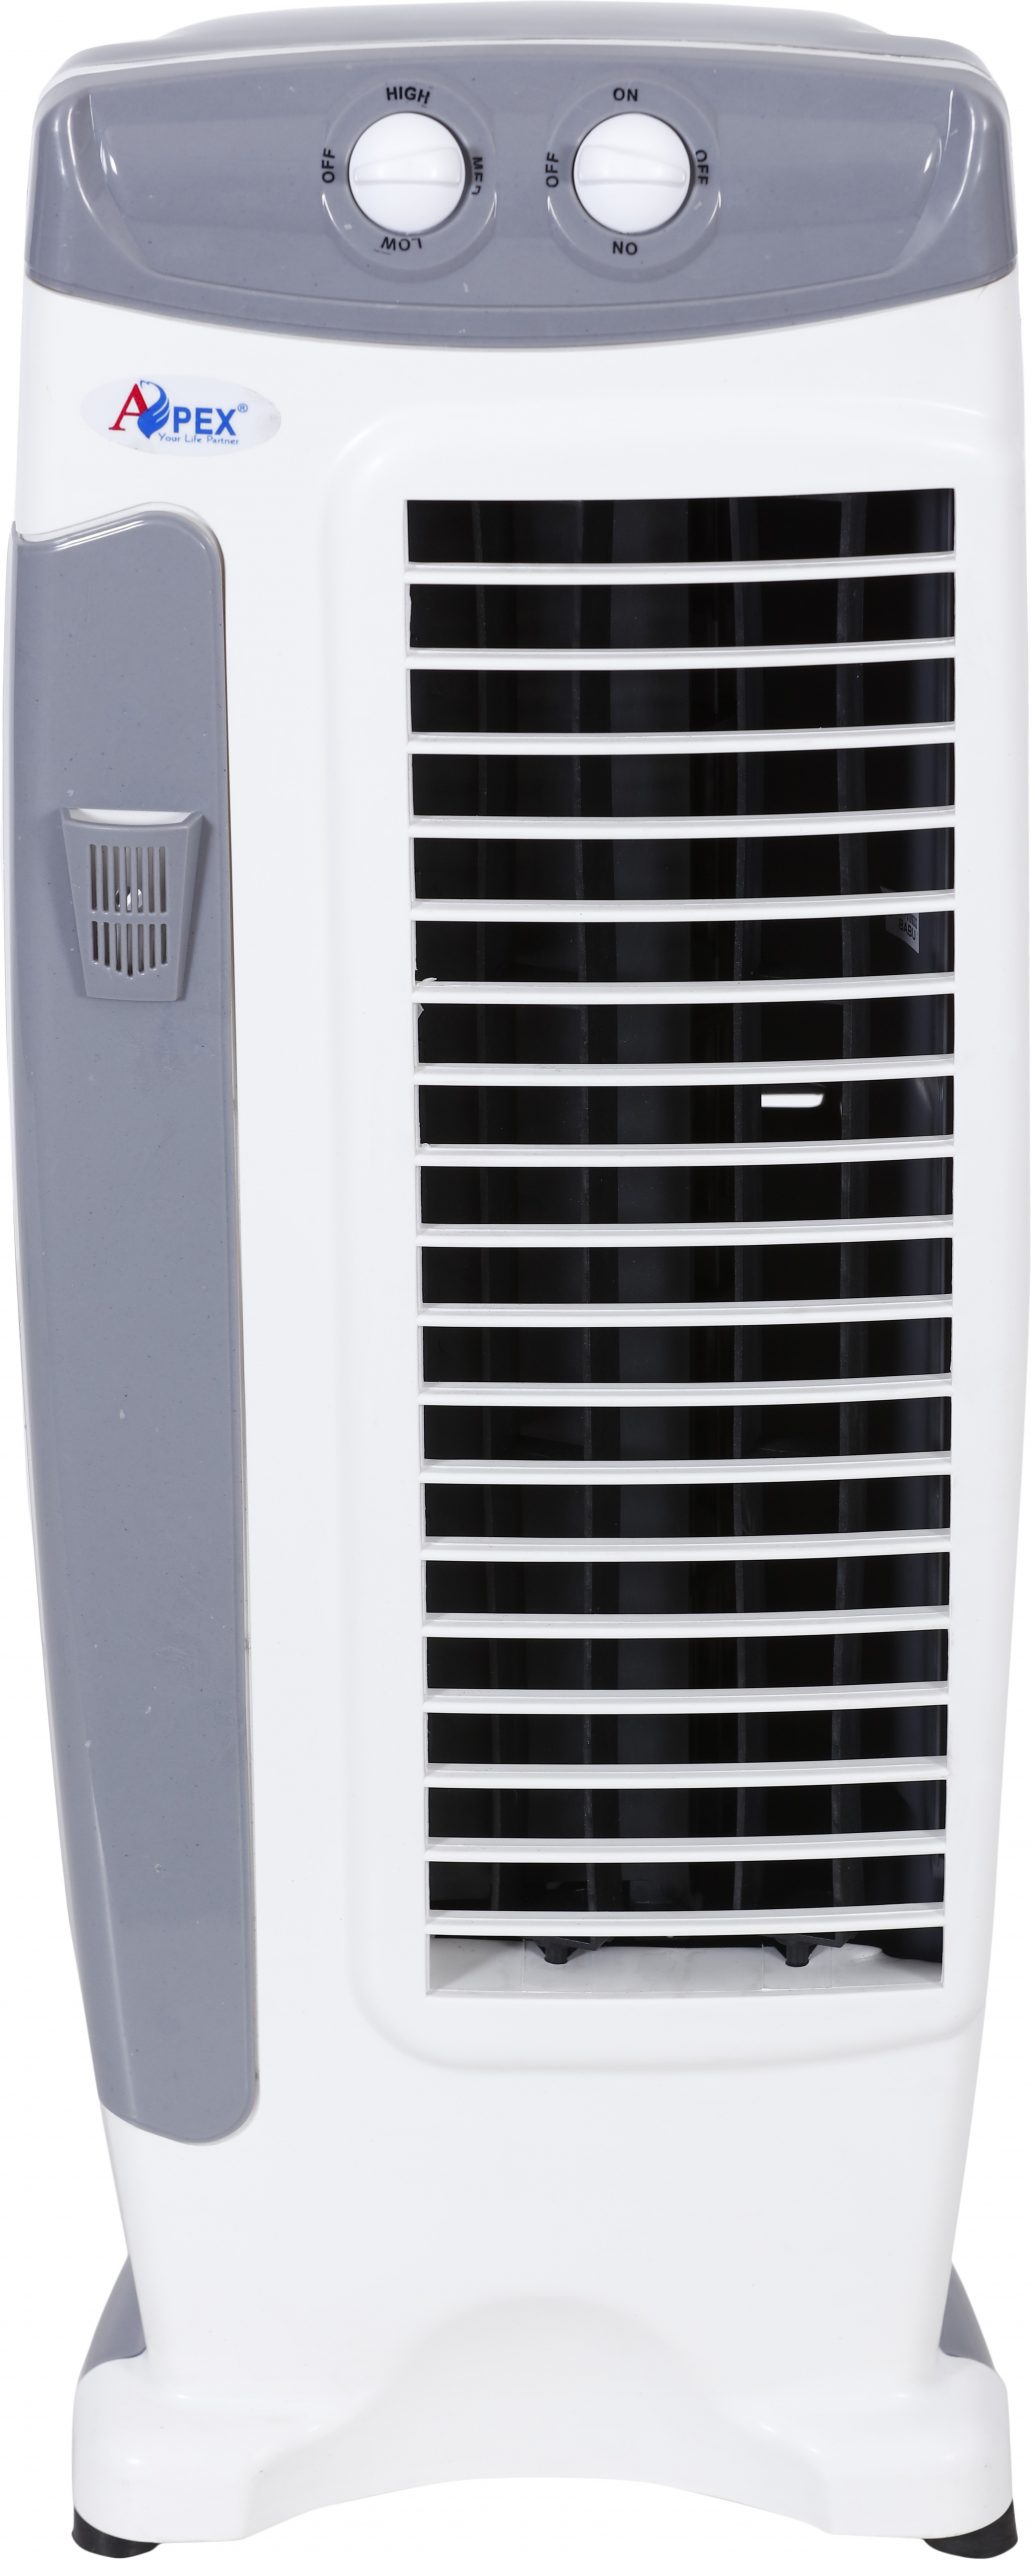 Apex Tower Tower Air Coolerwhite Grey 0 Litres Aircooler pertaining to dimensions 3419 X 8486